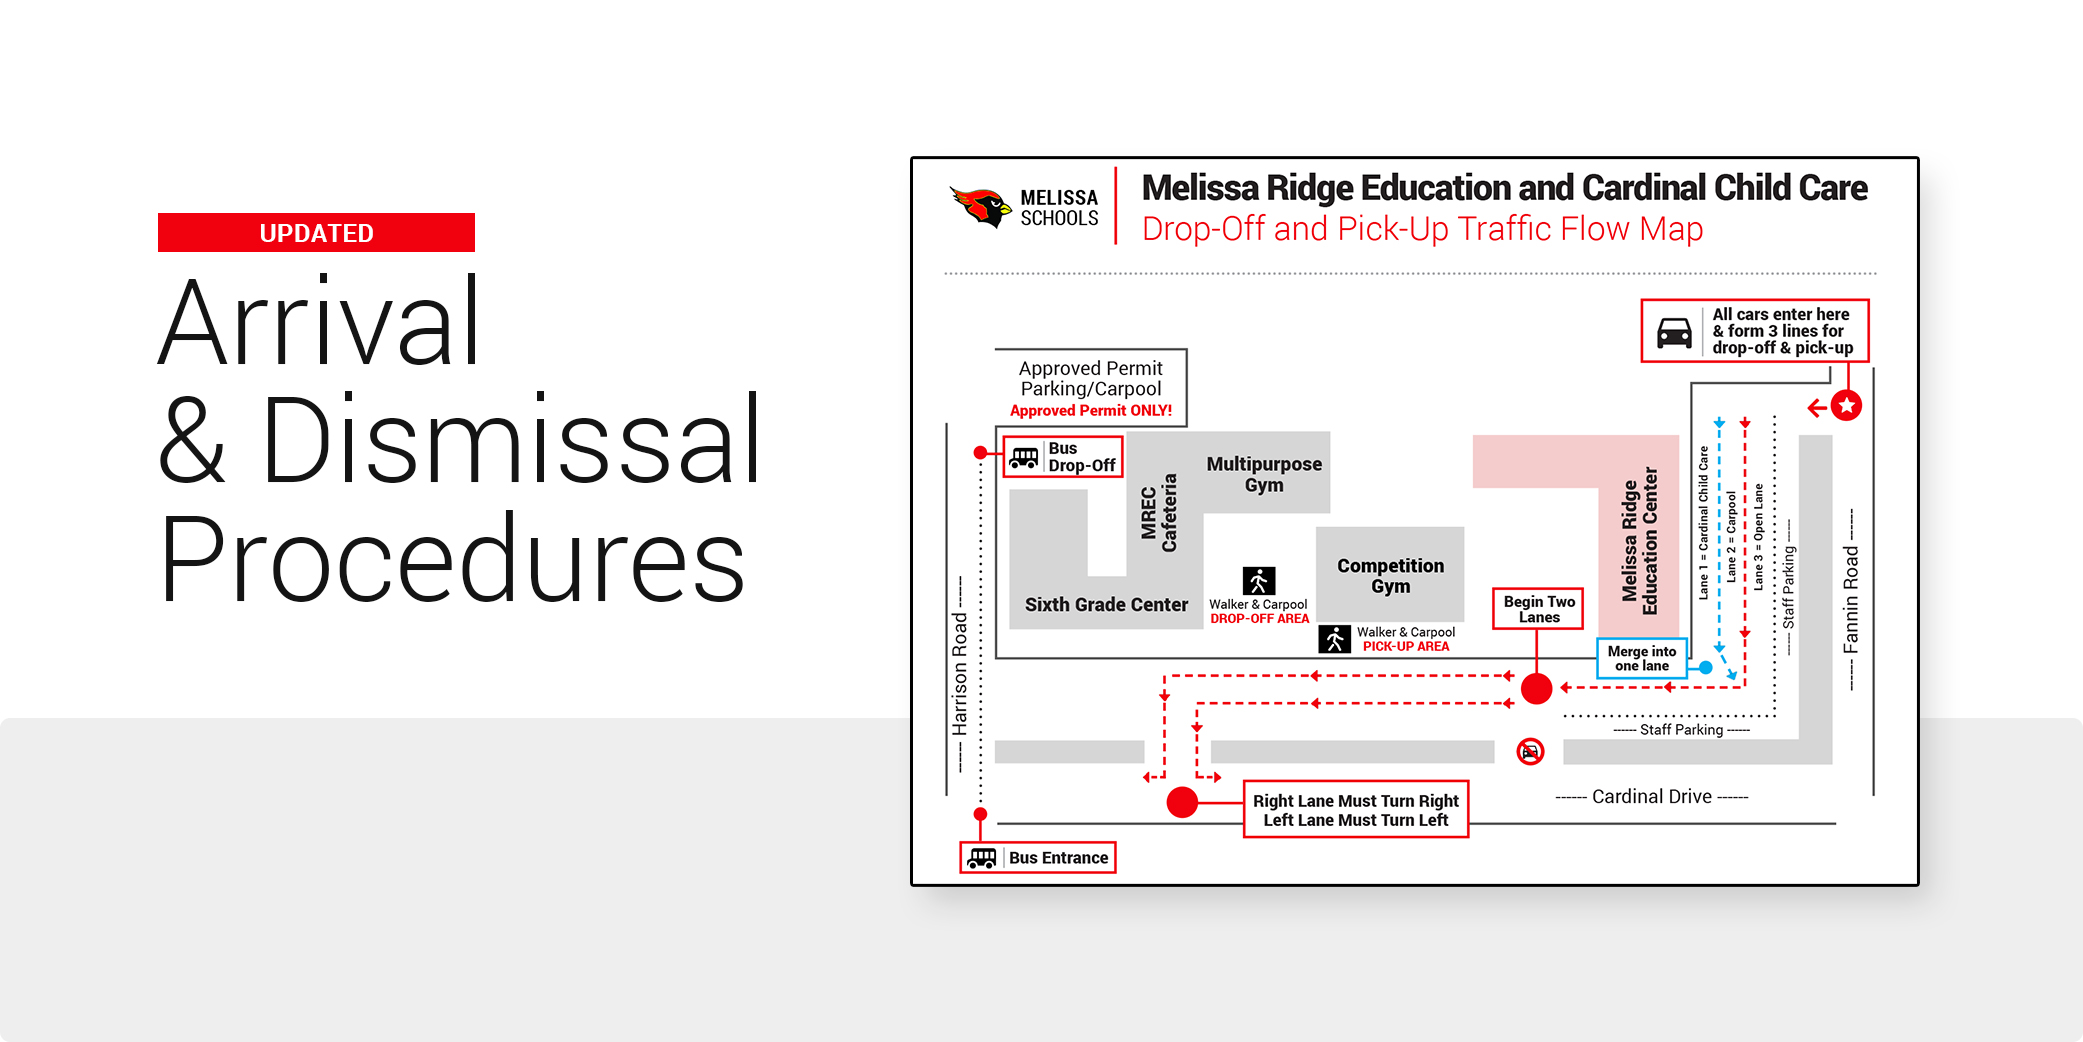 a banner displaying new arrival and dismissal information for Melissa Ridge Education Center